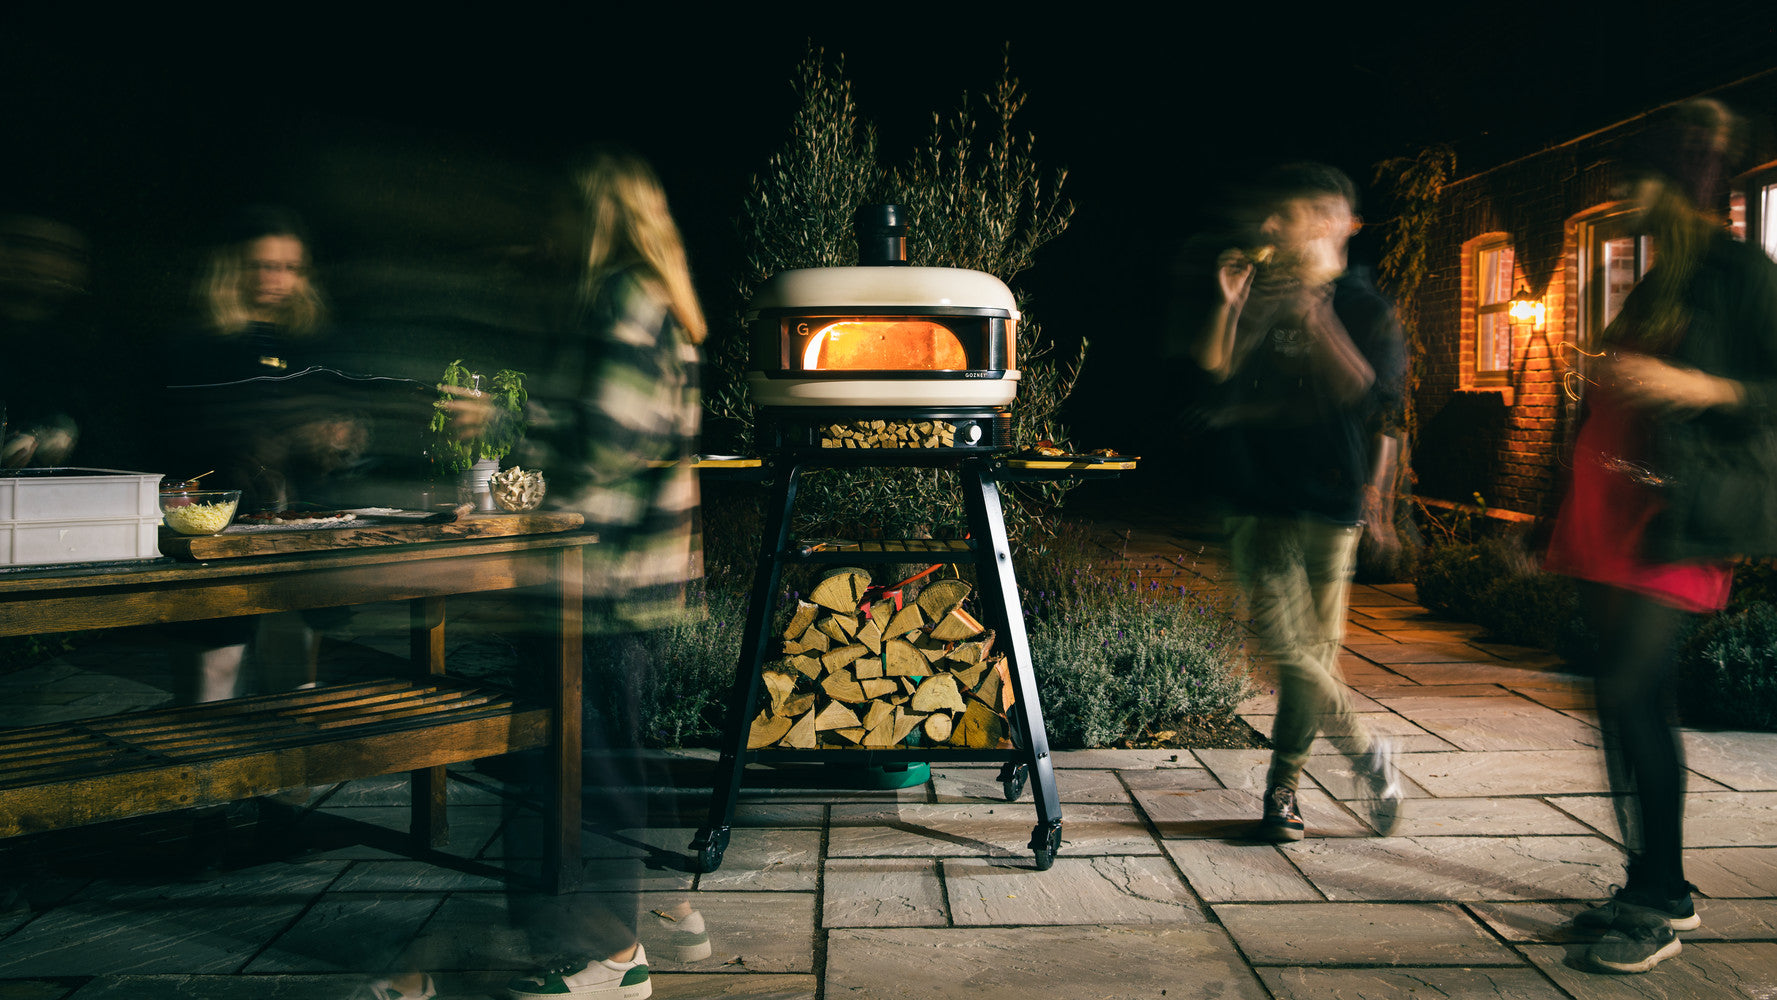 The Ultimate Pizza Party Guide | Gozney Blogs | Pizza Oven